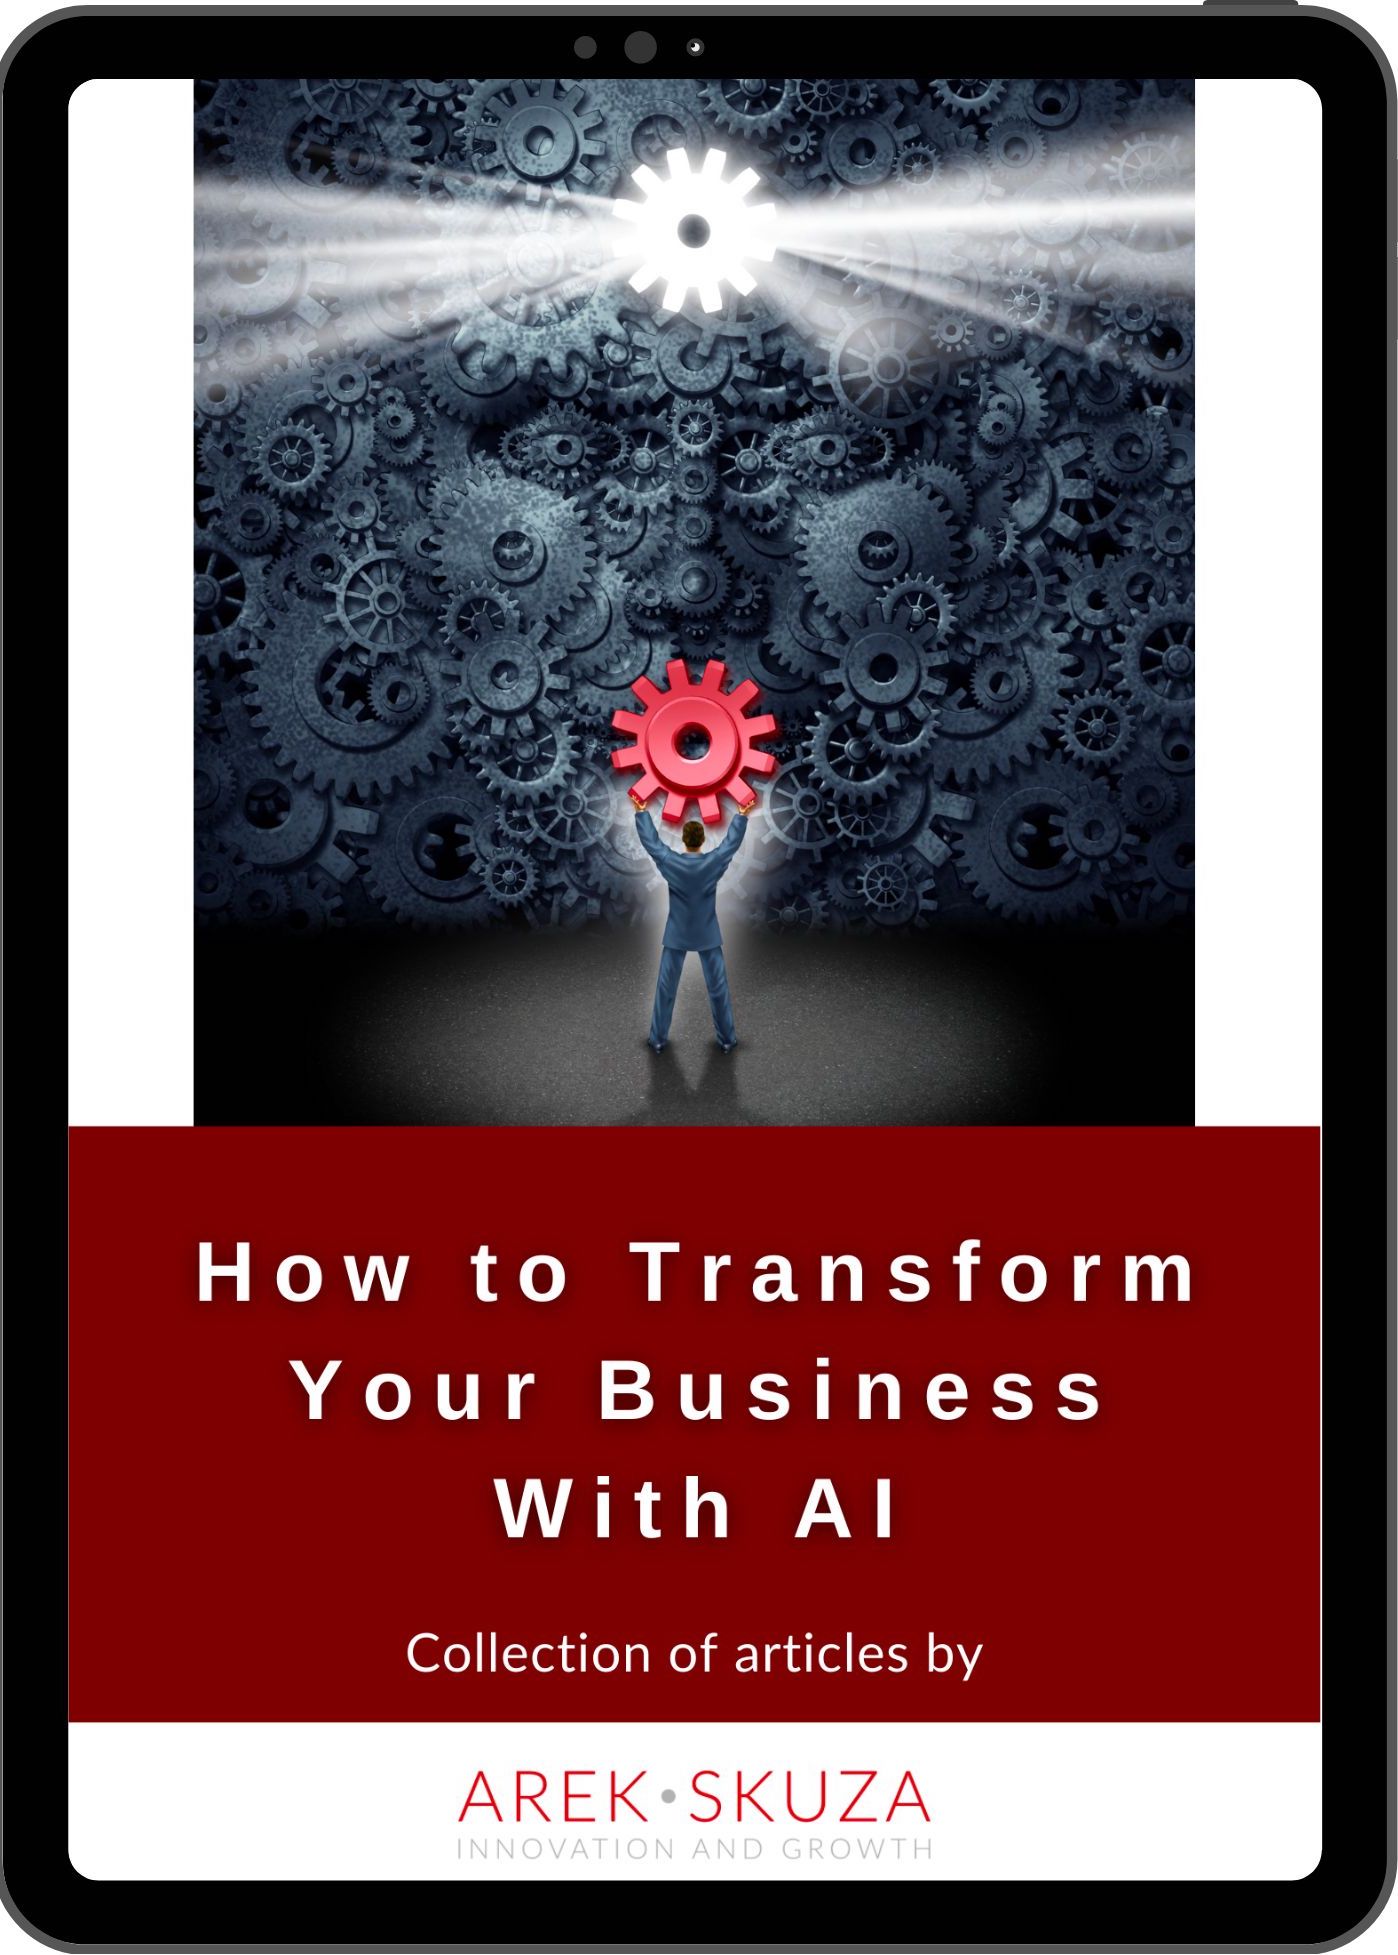 how-to-transform-your-business-with-ai-arek-skuza